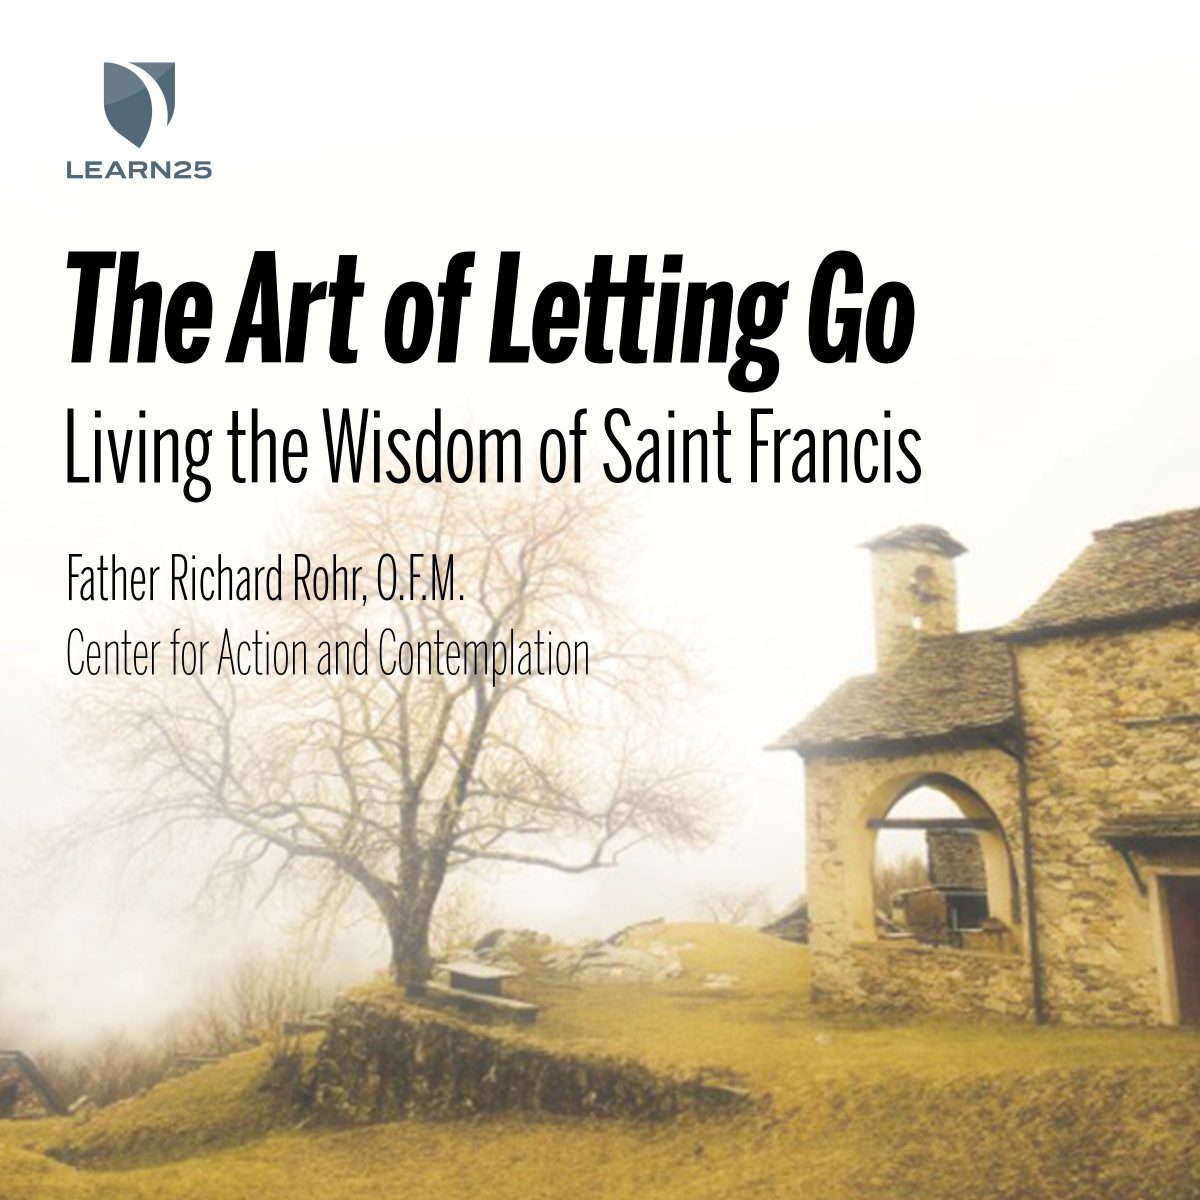 The Art of Letting Go Living the Wisdom of Saint Francis